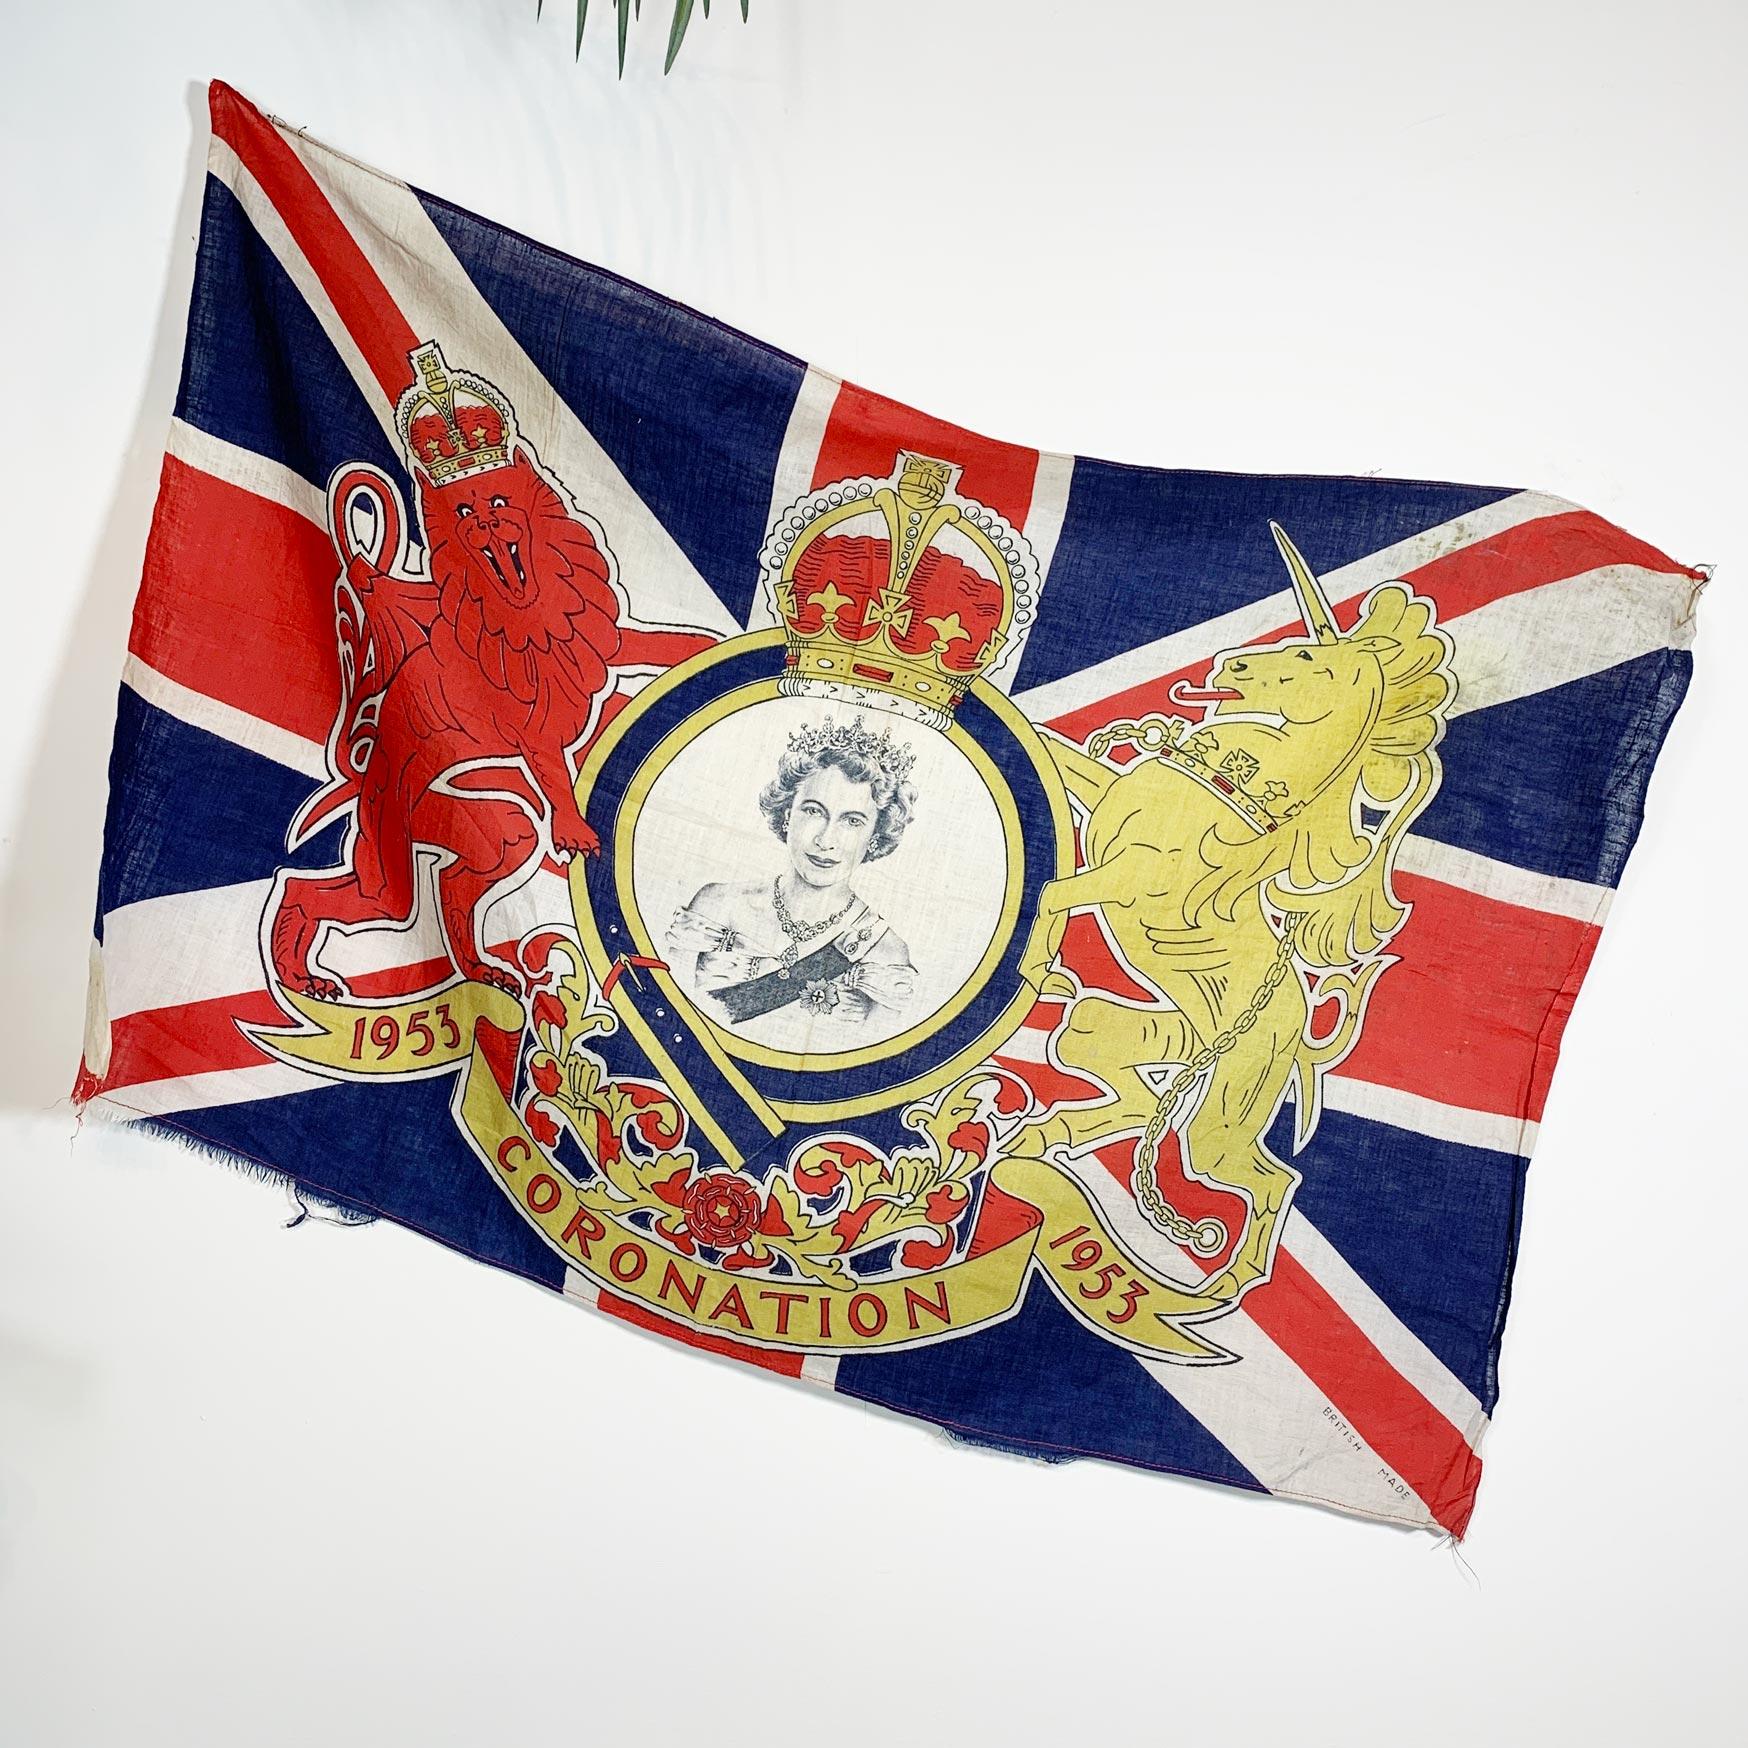 A Rare And Historical Royal Coronation Flag from The Coronation Of HRH Queen Elizabeth 2nd, June 2nd 1953.

Due To The Size This Flag Would Have Been Used Strung Hung From a Doorway Or Window For One Of The Many Street Parties Held To

Celebrate